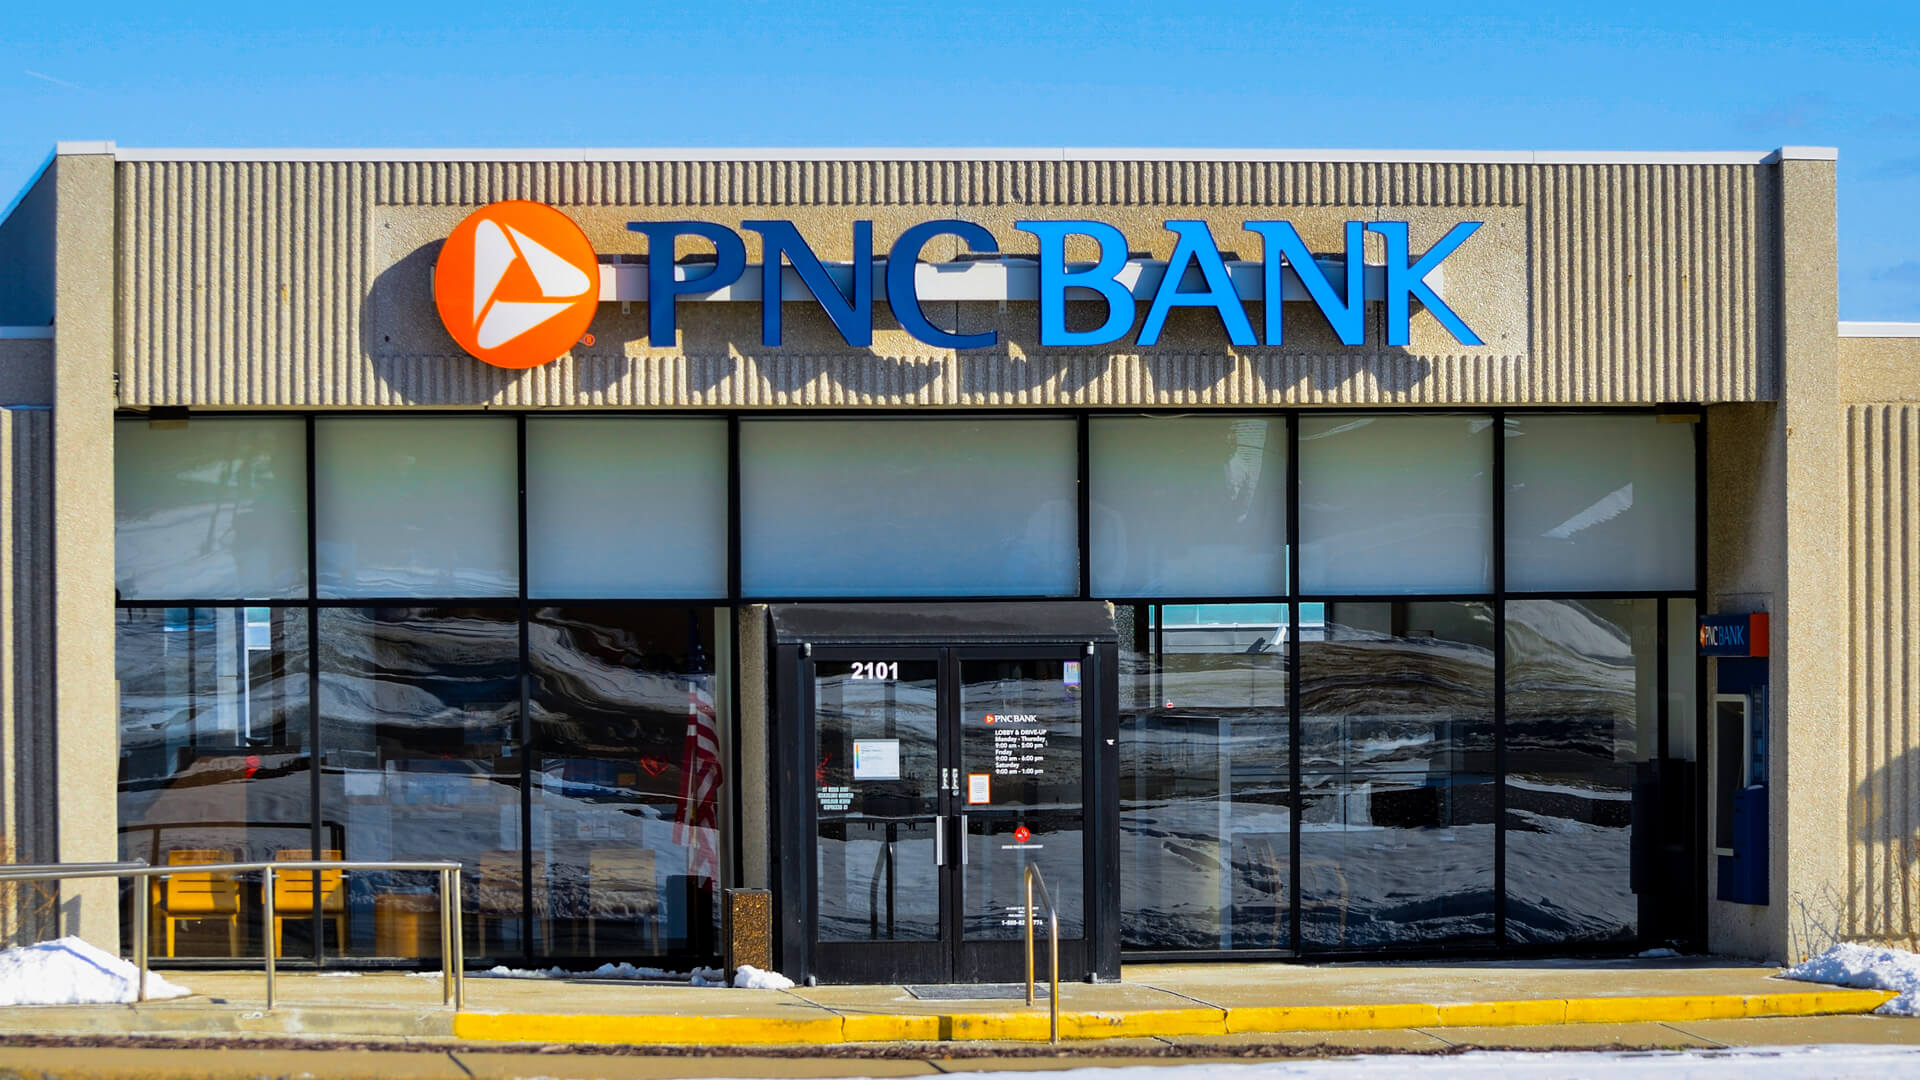 pnc bank locations in nc